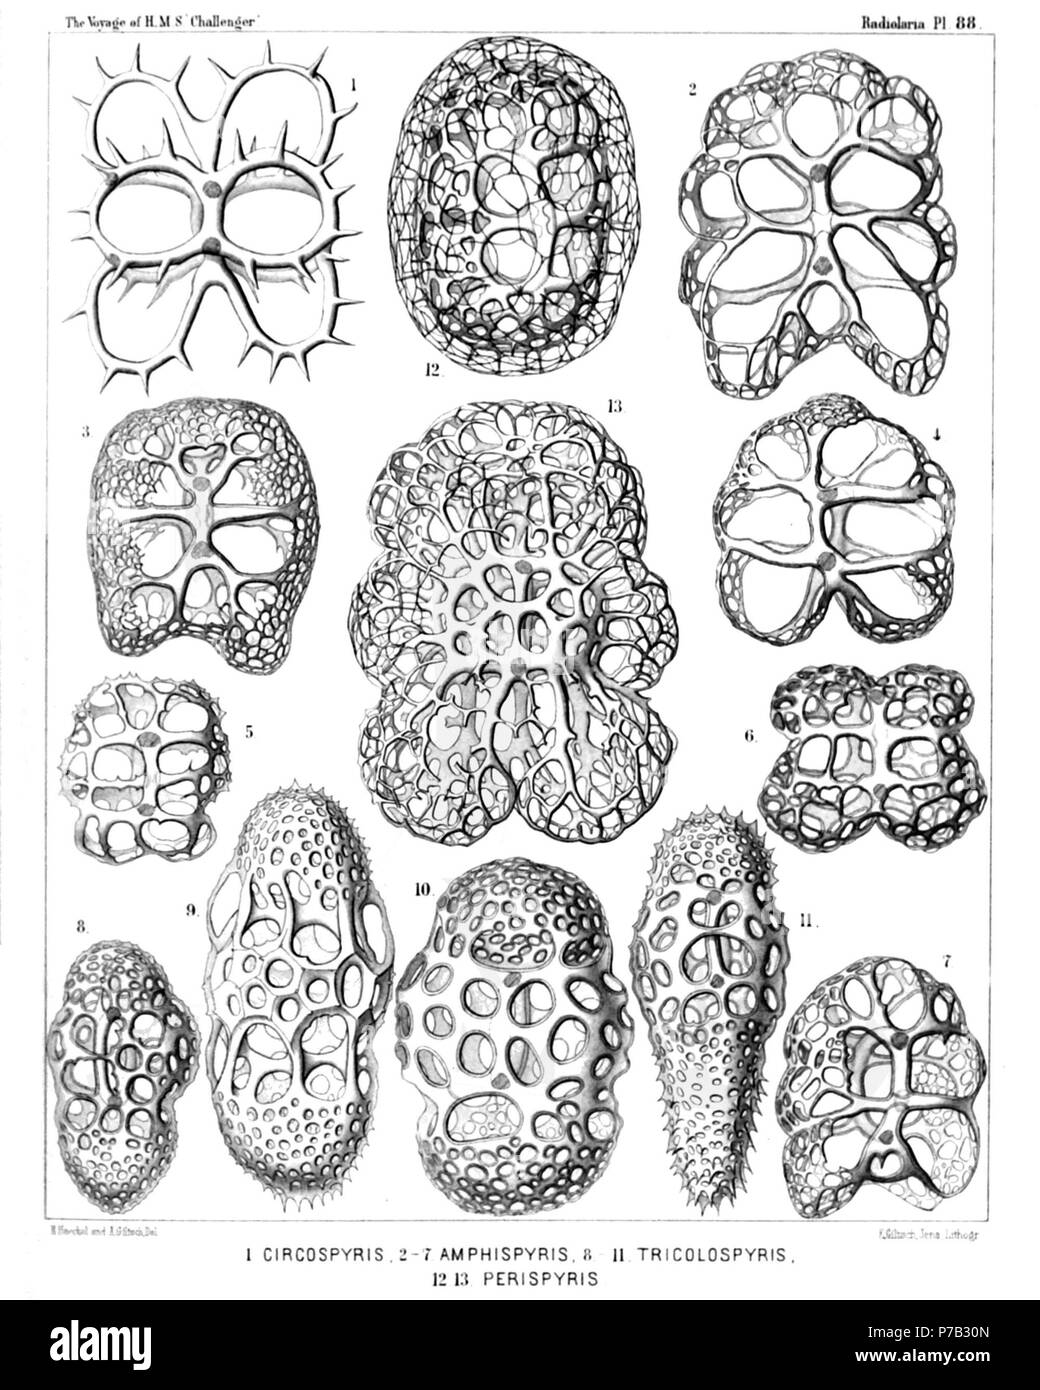 English: Illustration from Report on the Radiolaria collected by H.M.S. Challenger during the years 1873-1876. Part III. Original description follows:  Plate 88. Tympanida et Androspyrida.  Diam.  Fig. 1. Toxarium circospyris, n. sp., × 400  Fig. 2. Amphispyris sternalis, n. sp., × 300  Fig. 3. Amphispyris costata, n. sp., × 300  Fig. 4. Amphispyris thorax, n. sp., × 300  Fig. 5. Amphispyris subquadrata, n. sp., × 300  Fig. 6. Amphispyris quadrigemina, n. sp., × 300  Fig. 7. Amphispyris toxarium, n. sp., × 300  Fig. 8. Tricolospyris baconiana, n. sp., × 400  Fig. 9. Tricolospyris leibnitziana, Stock Photo